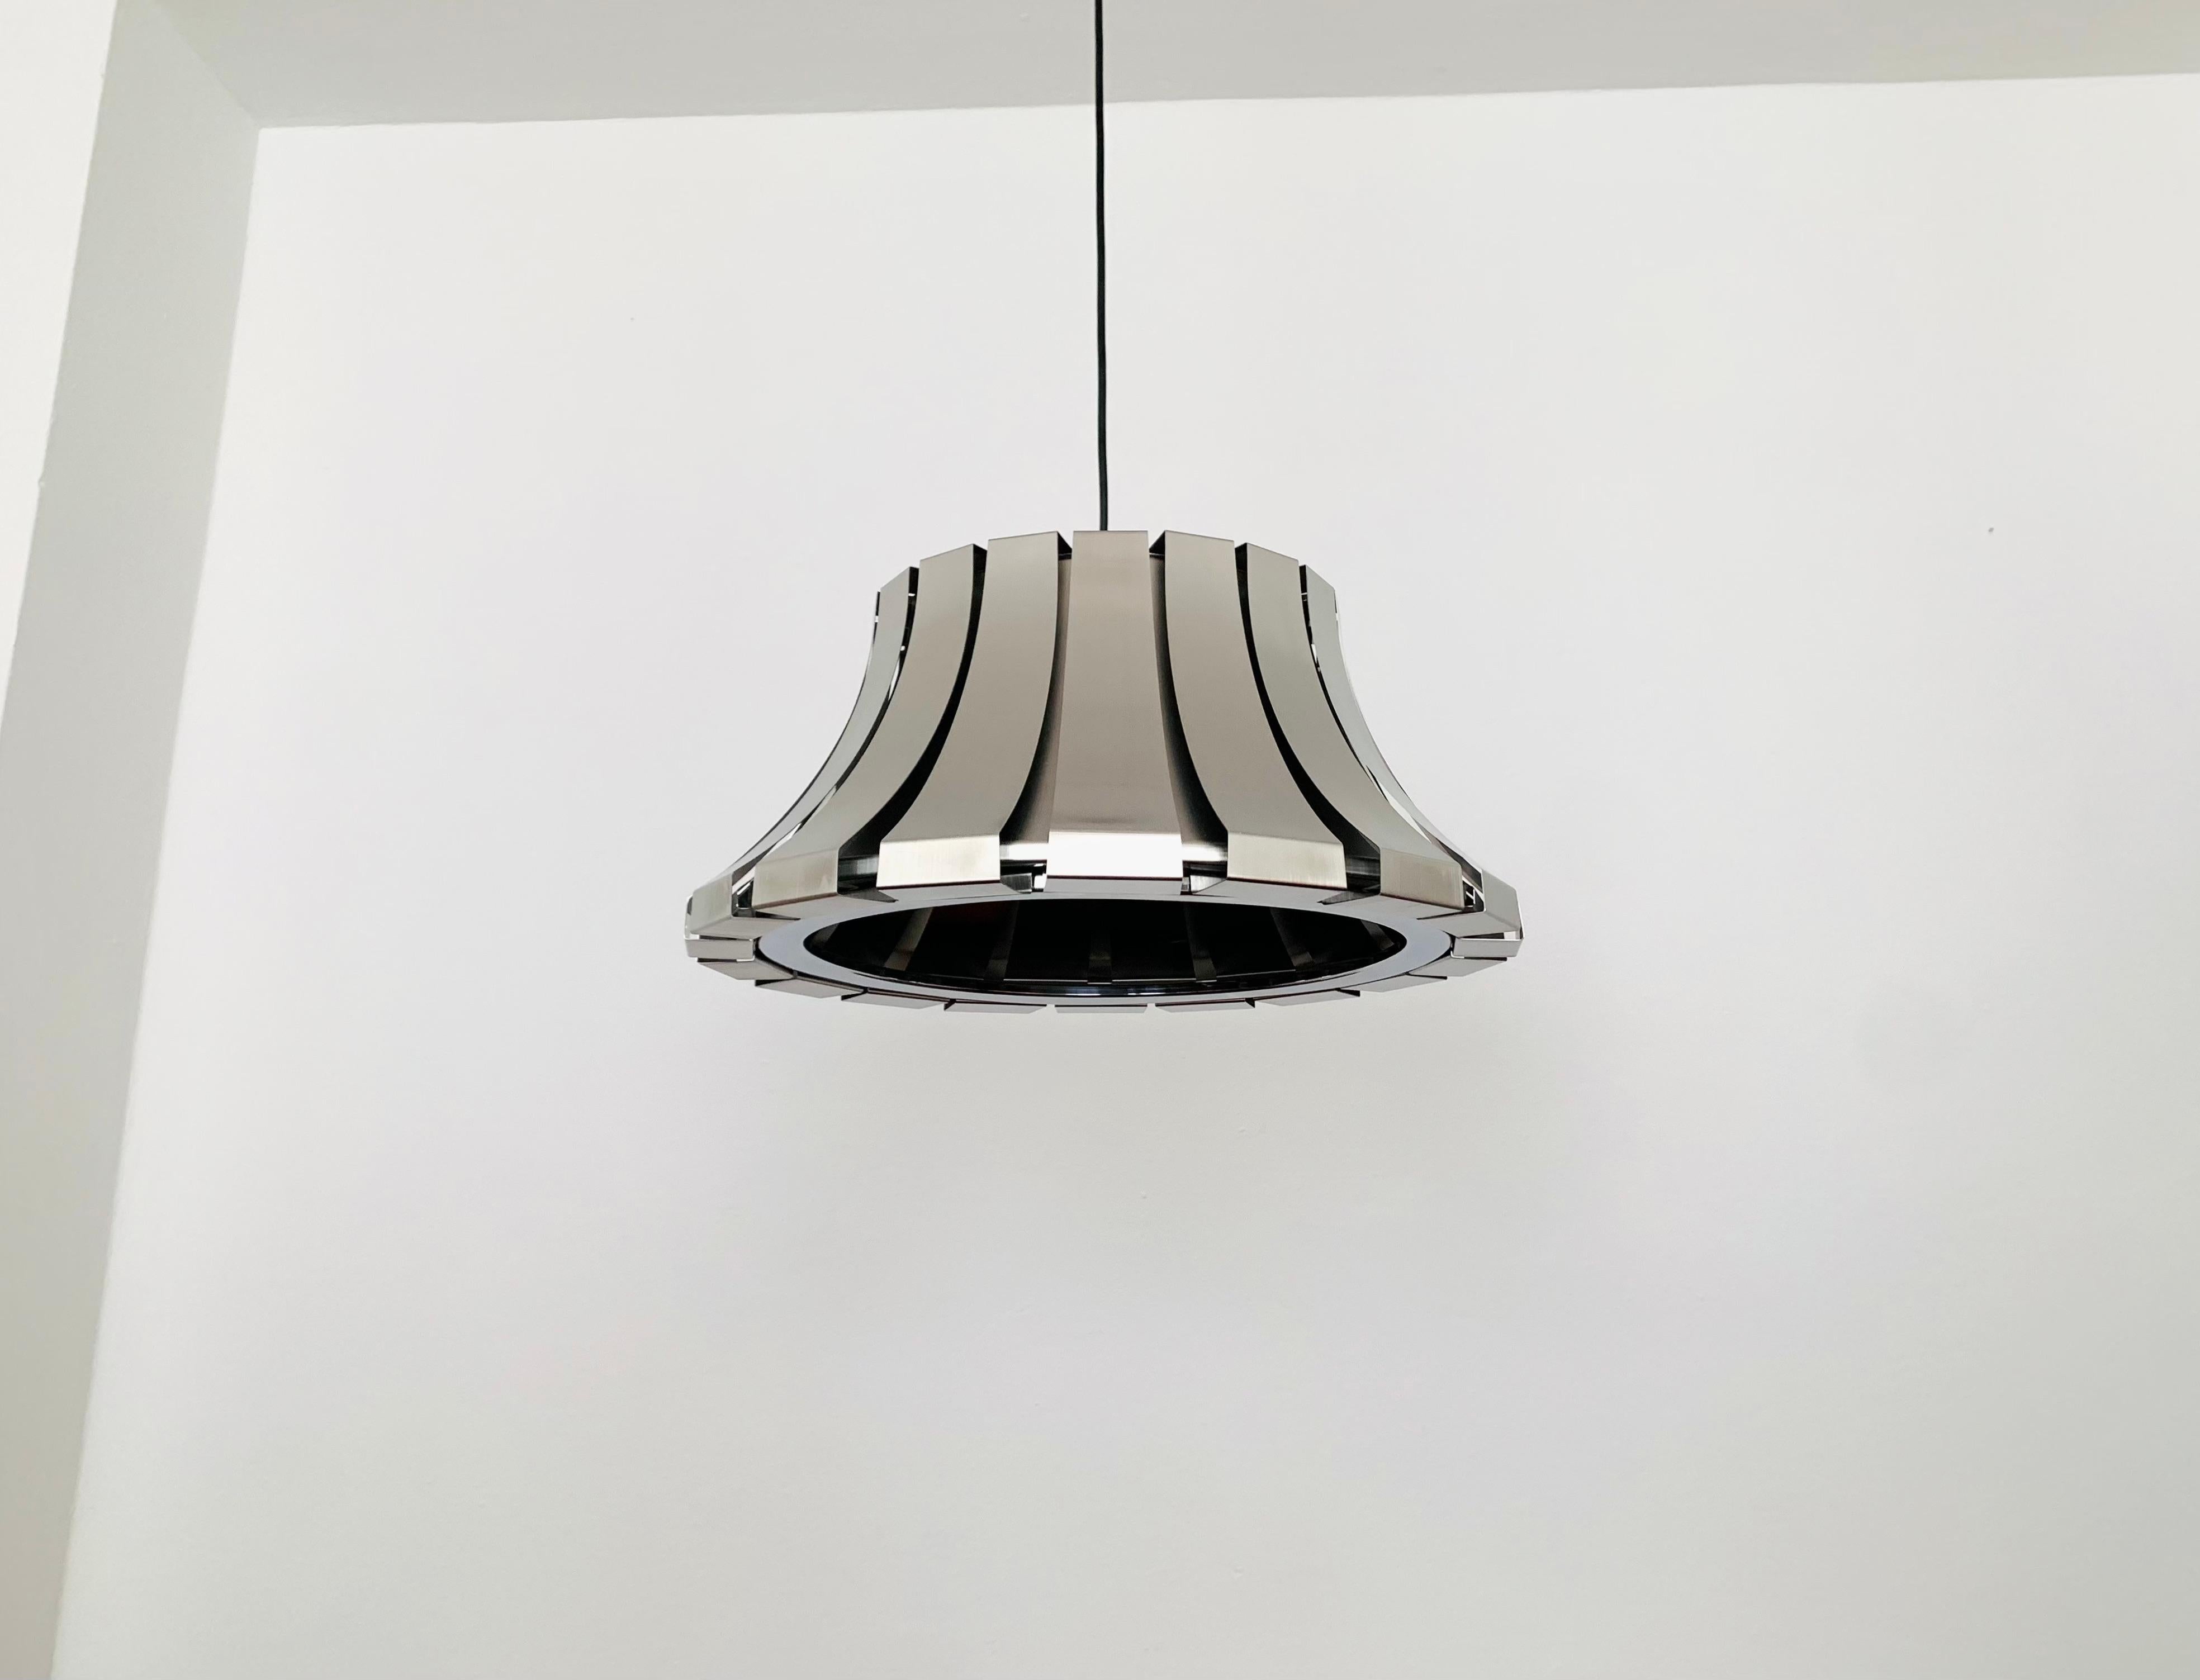 Wonderful stainless steel pendant lamp from the 1960s.
The design of the lamp creates a cozy atmosphere.
Very high quality processing.
A great design object and an enrichment for every home.

Design: Elio Martinelli

Condition:

Very good